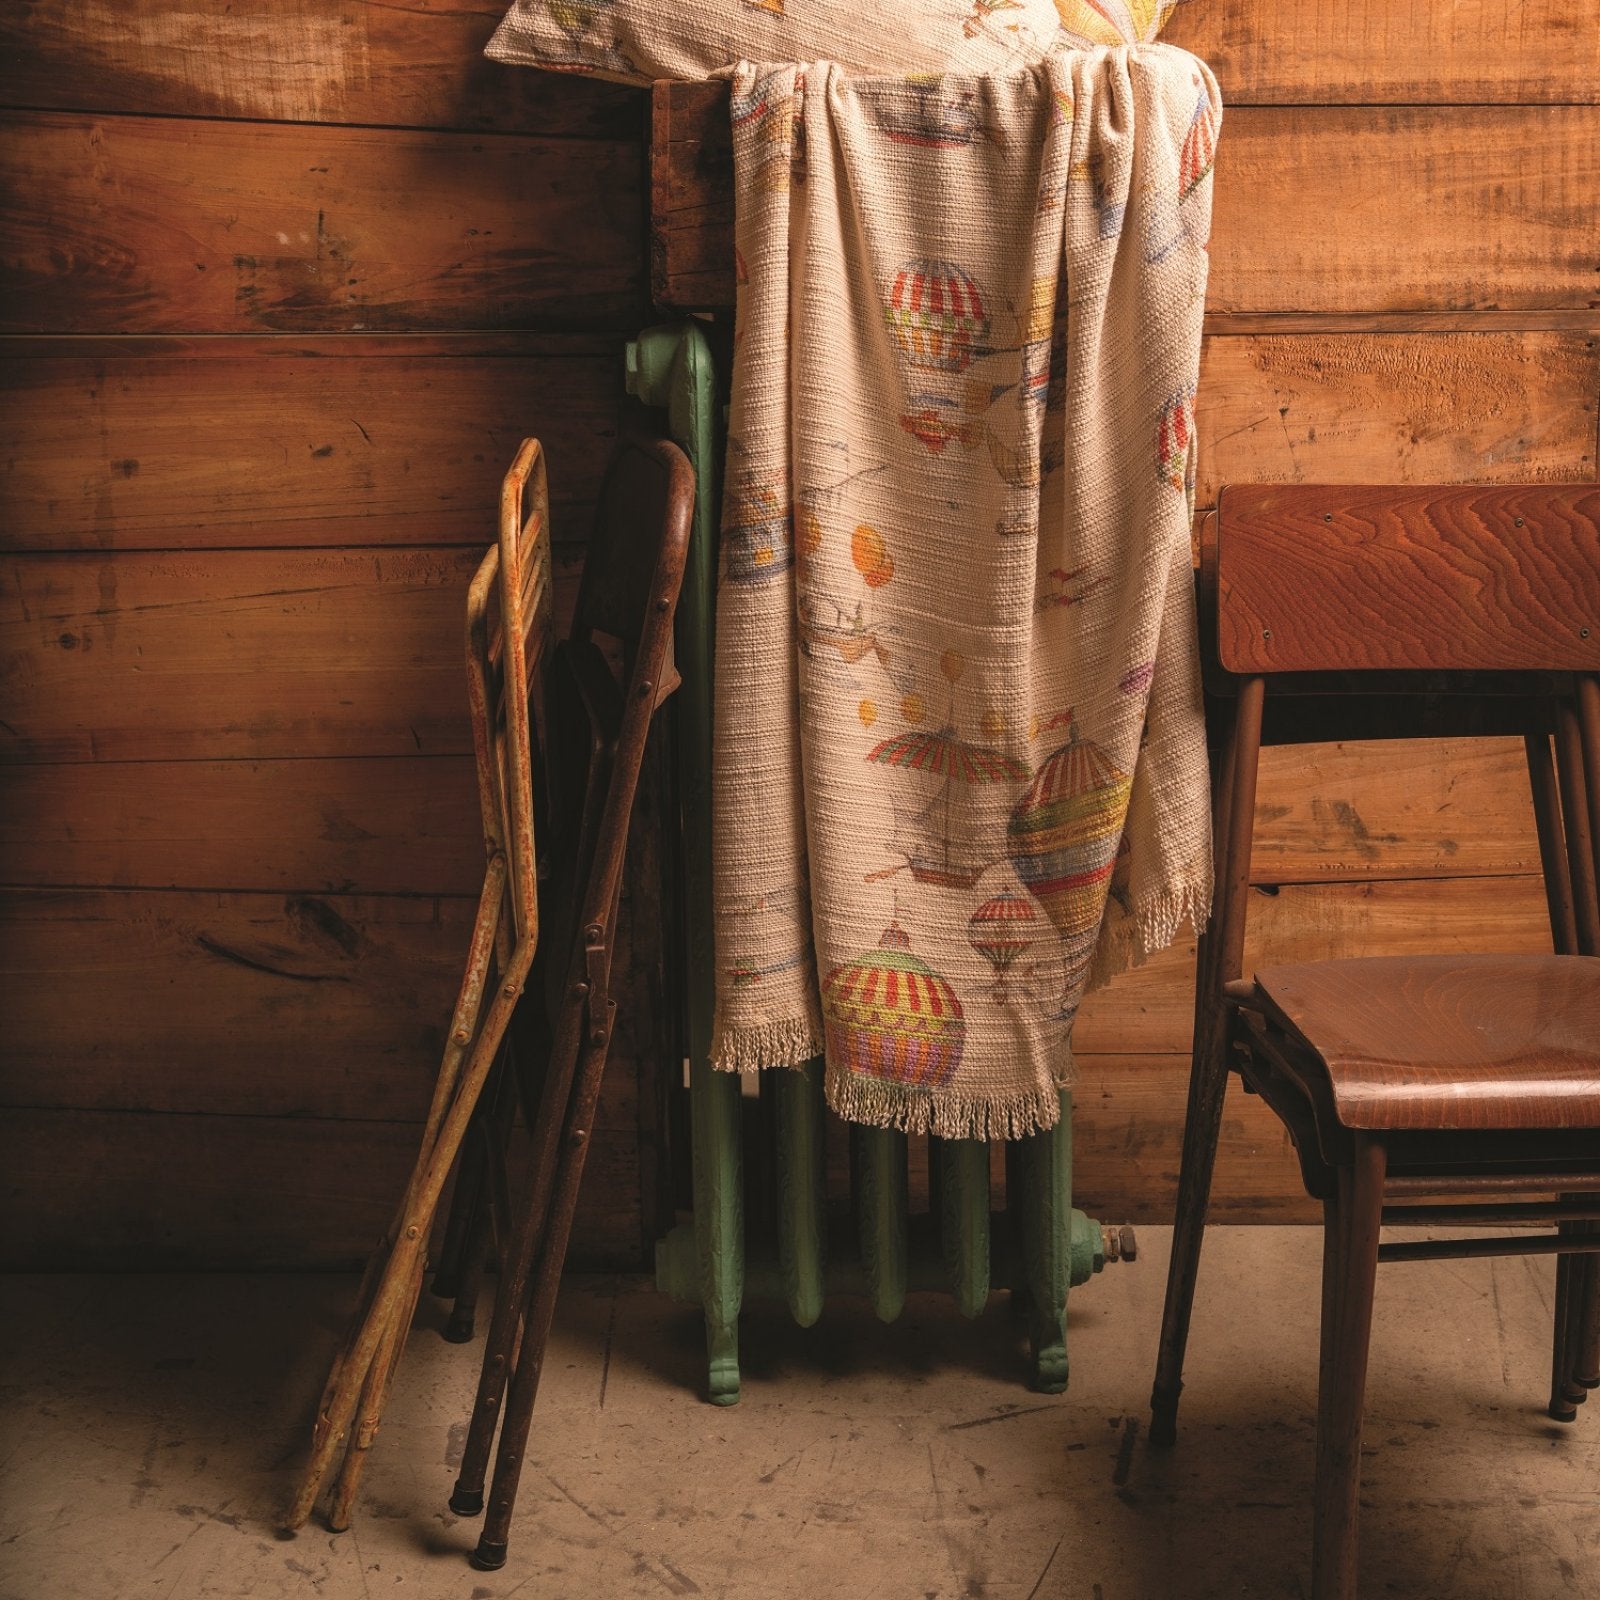 Tessitura Toscana Telerie, “Flyby”, Woven cotton printed throw.